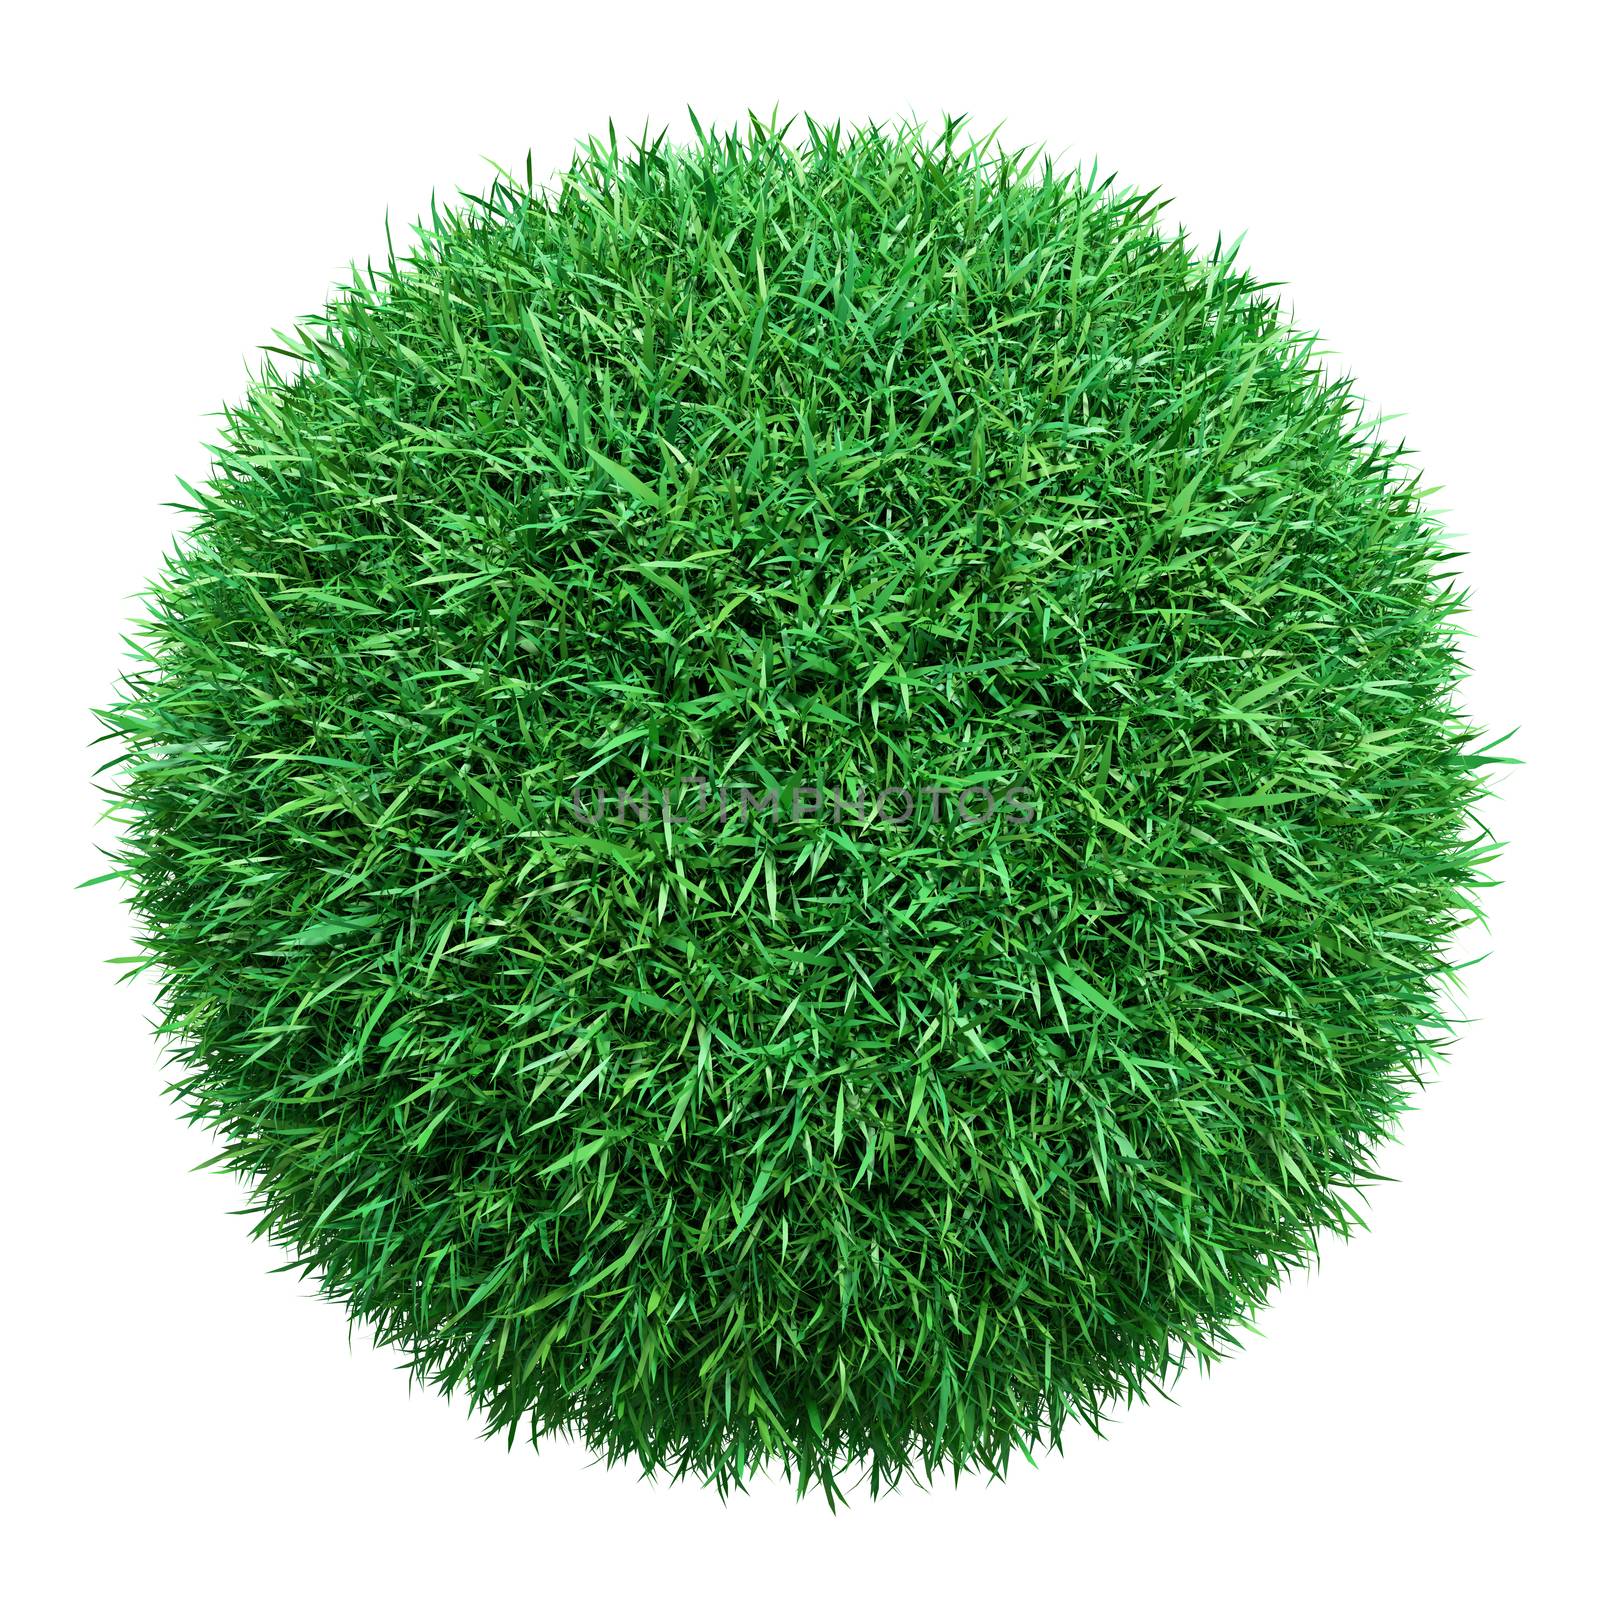 Green grass ball. Isolated on white. 3D illustration